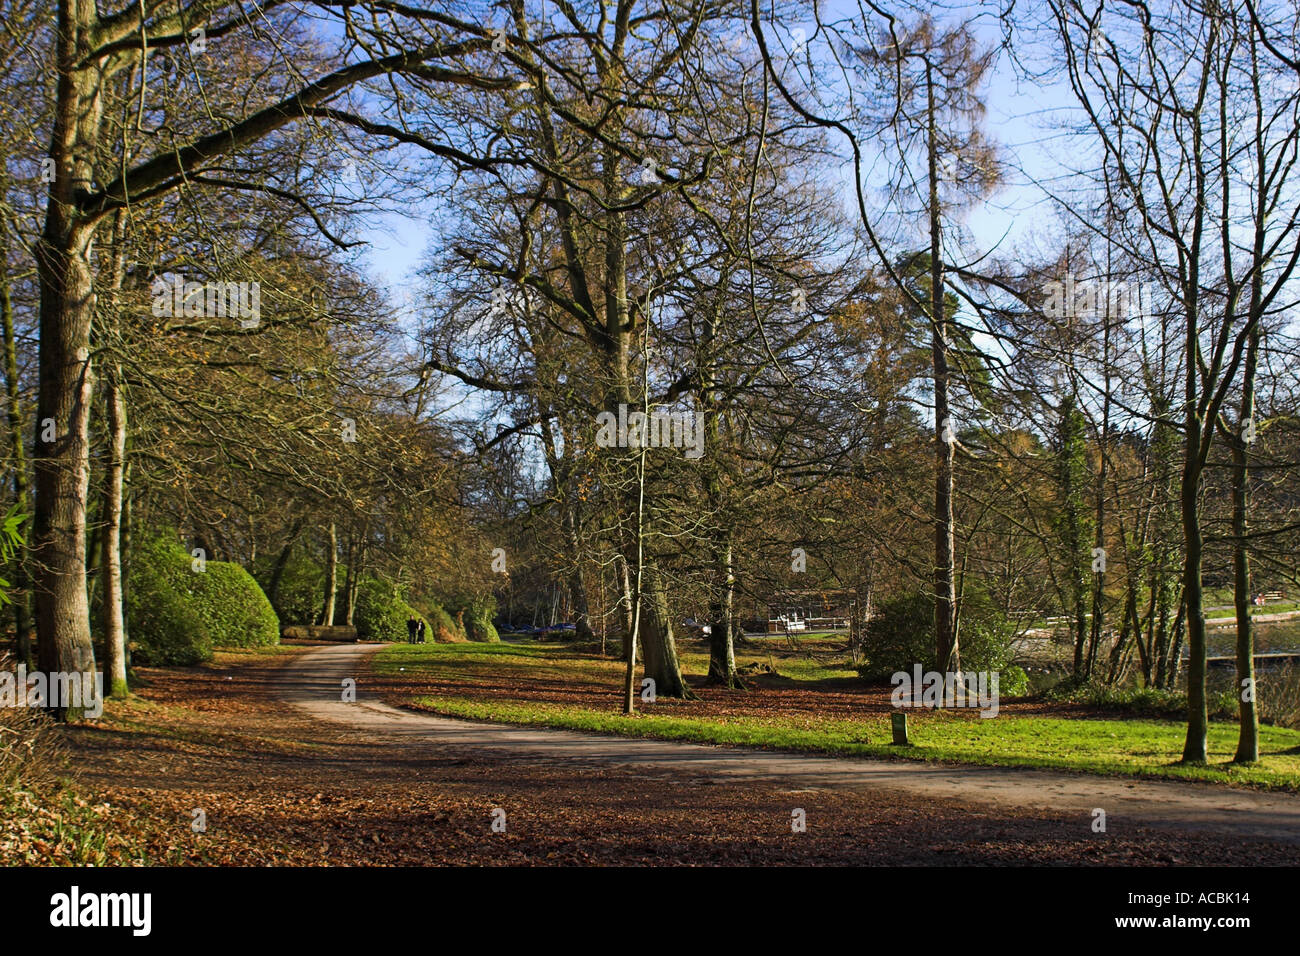 A road near the Shearwater lake on the Longleat estate in Wiltshire, England Stock Photo